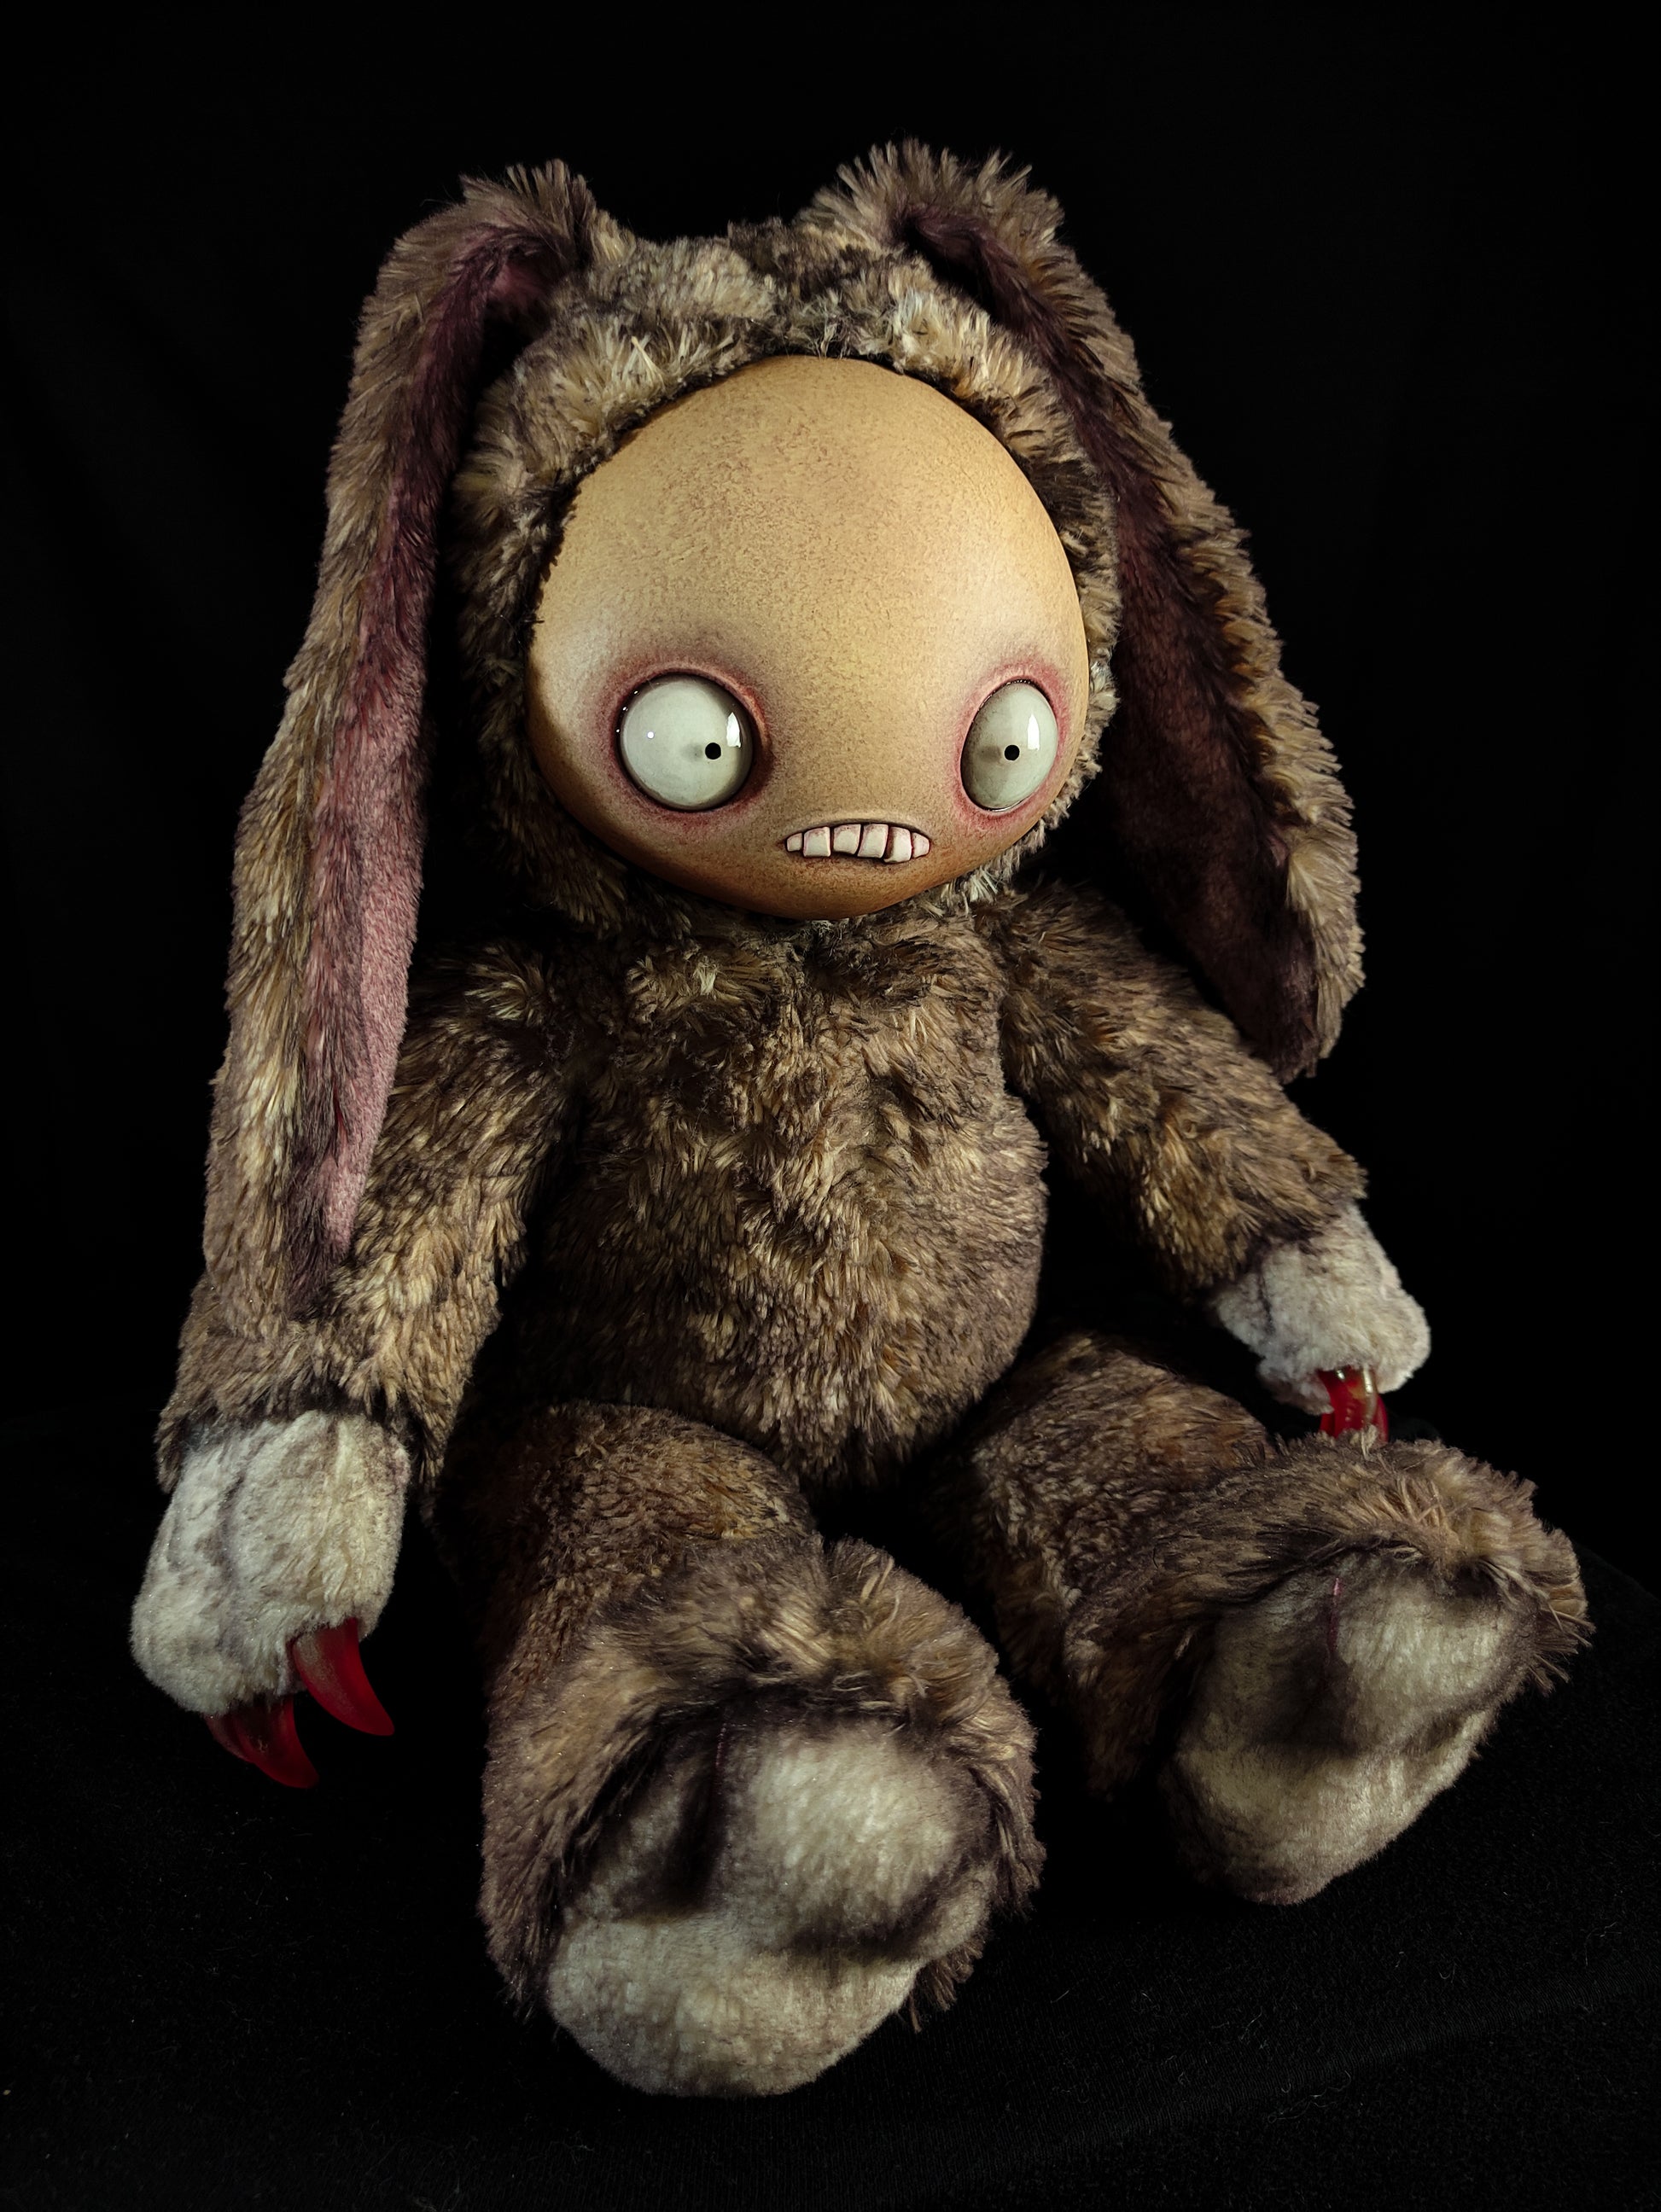 Jitters (Rickety Rottity Ver.) - Monster Art Doll Plush Toy